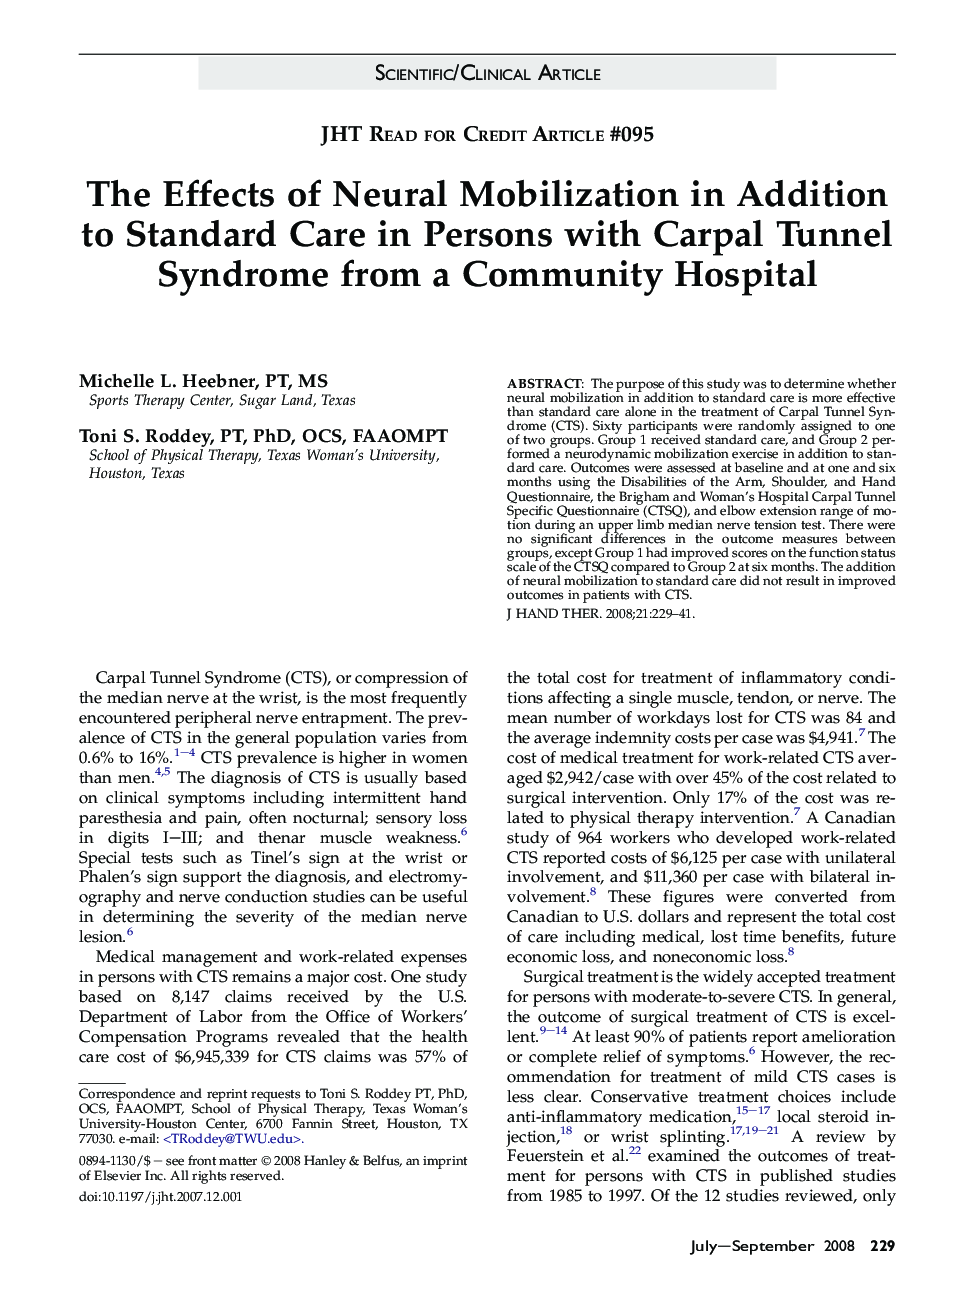 The Effects of Neural Mobilization in Addition to Standard Care in Persons with Carpal Tunnel Syndrome from a Community Hospital